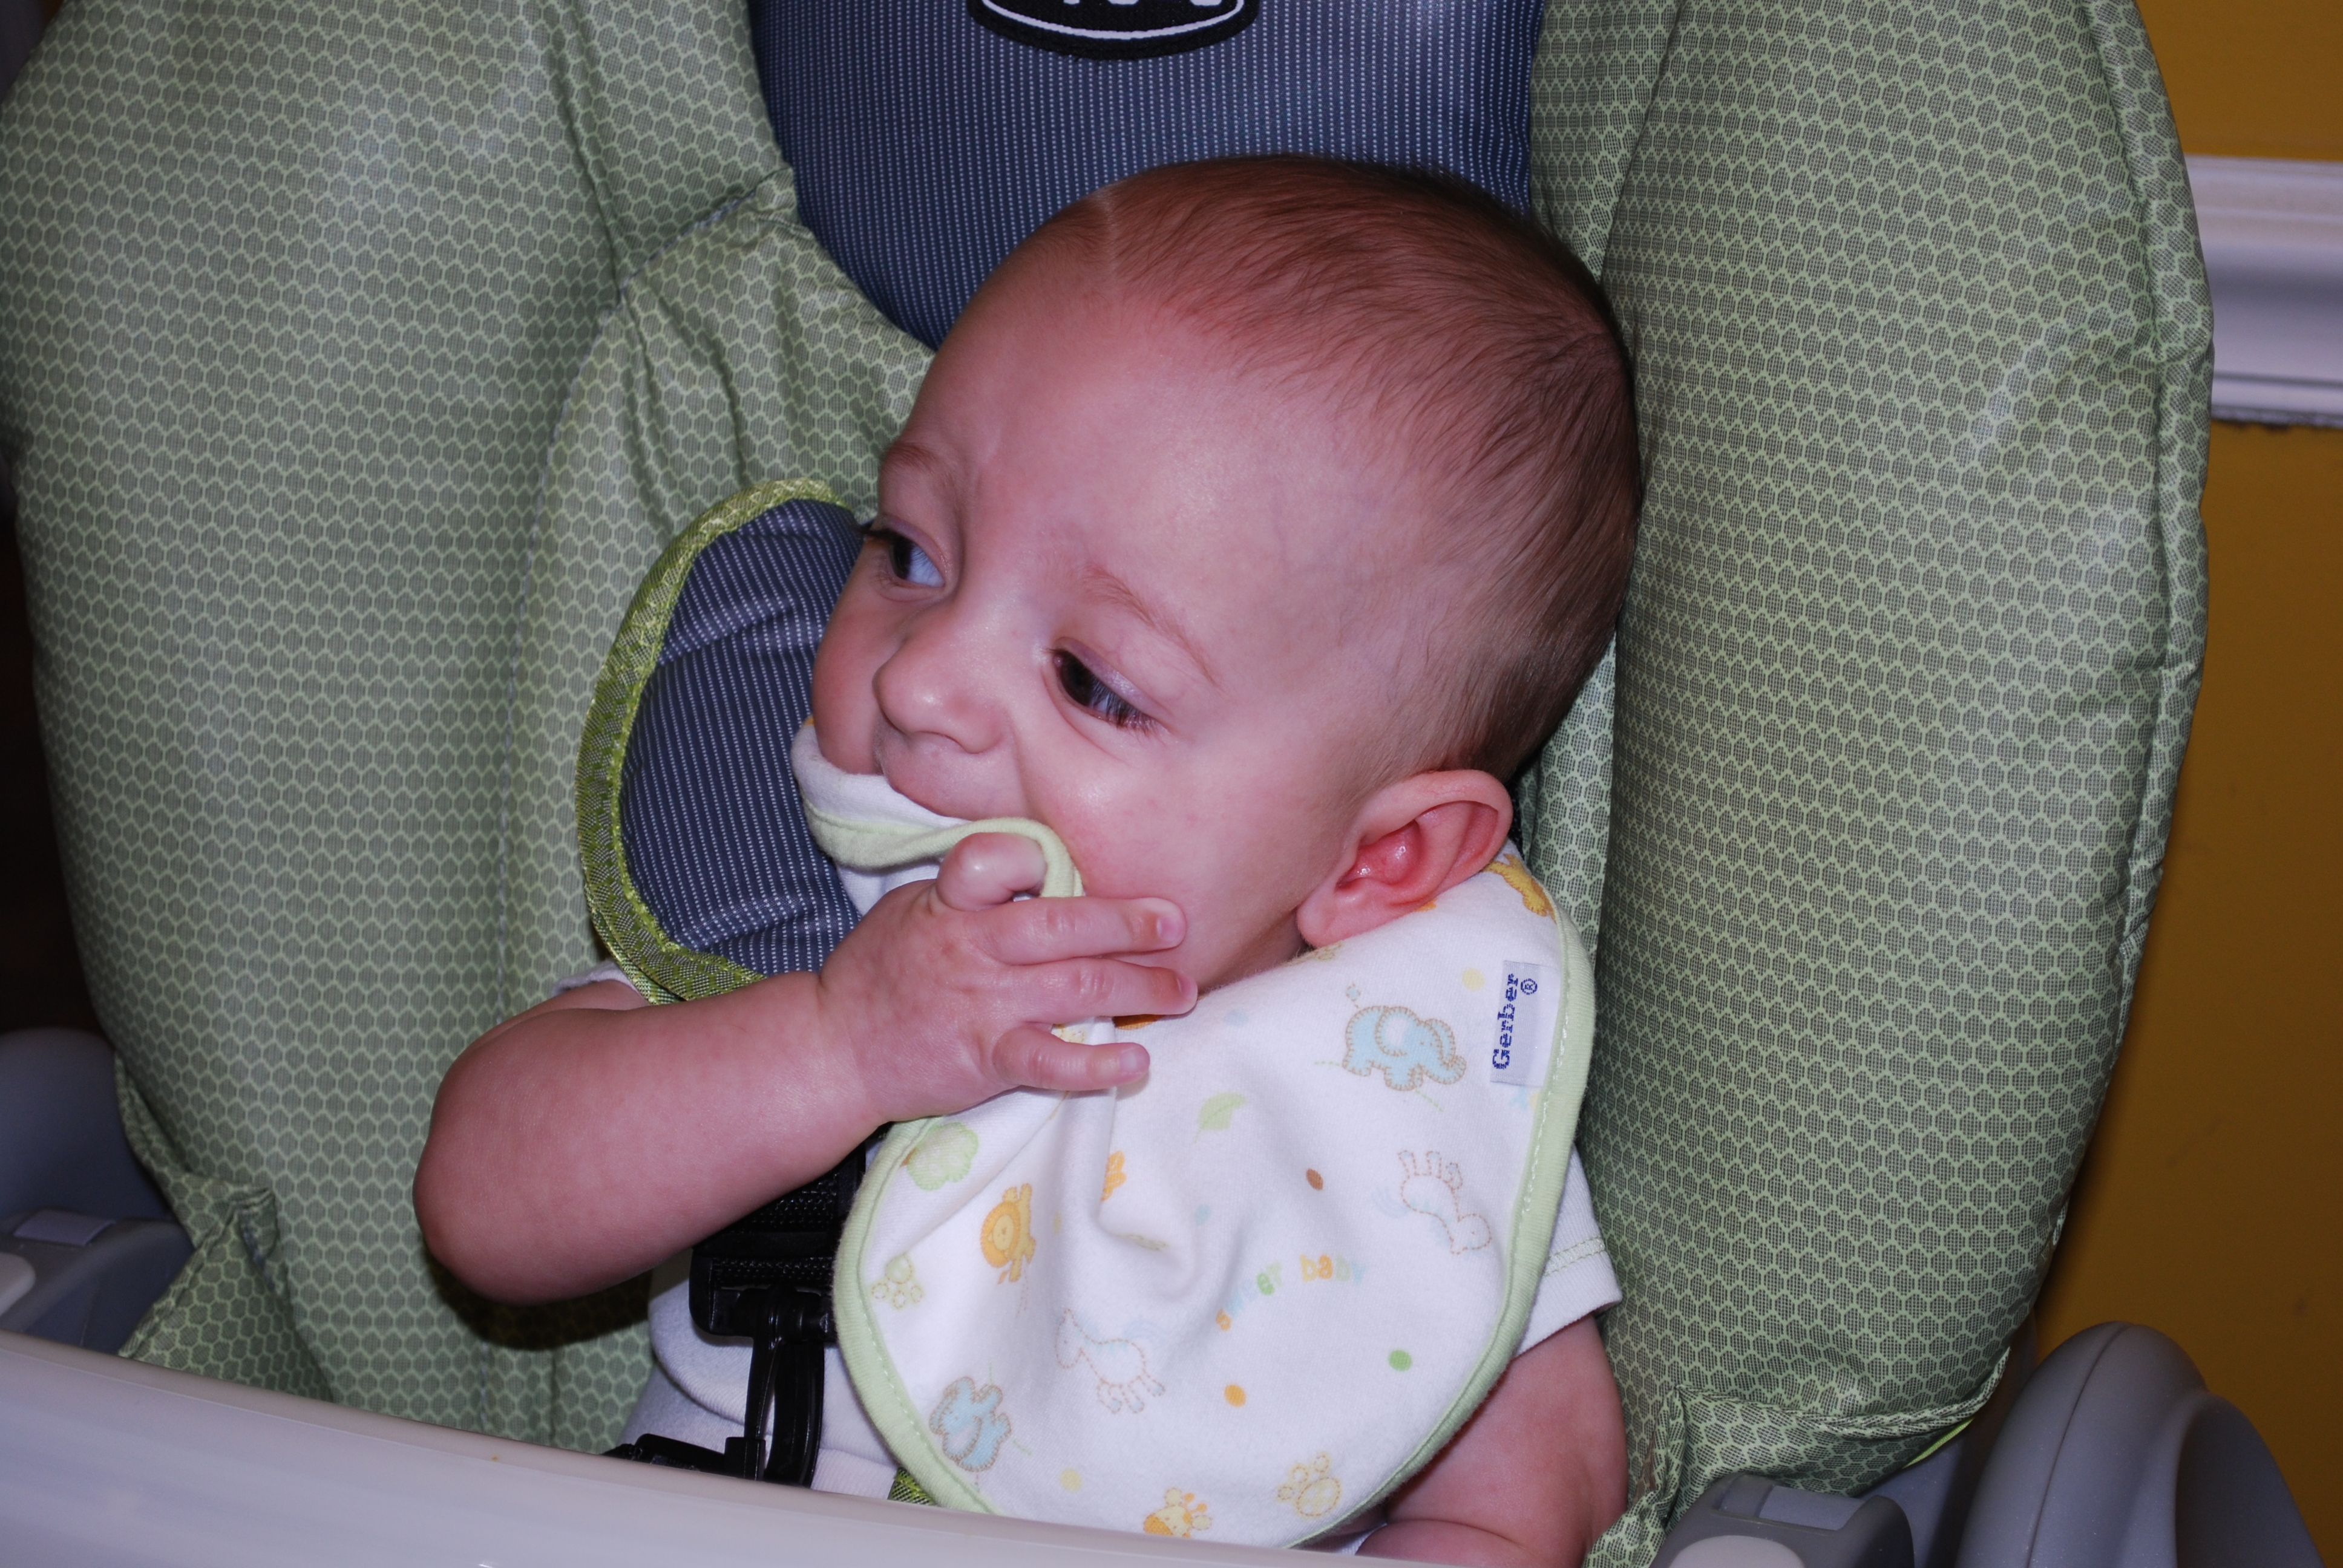 Eating my bib because momma is too slow!